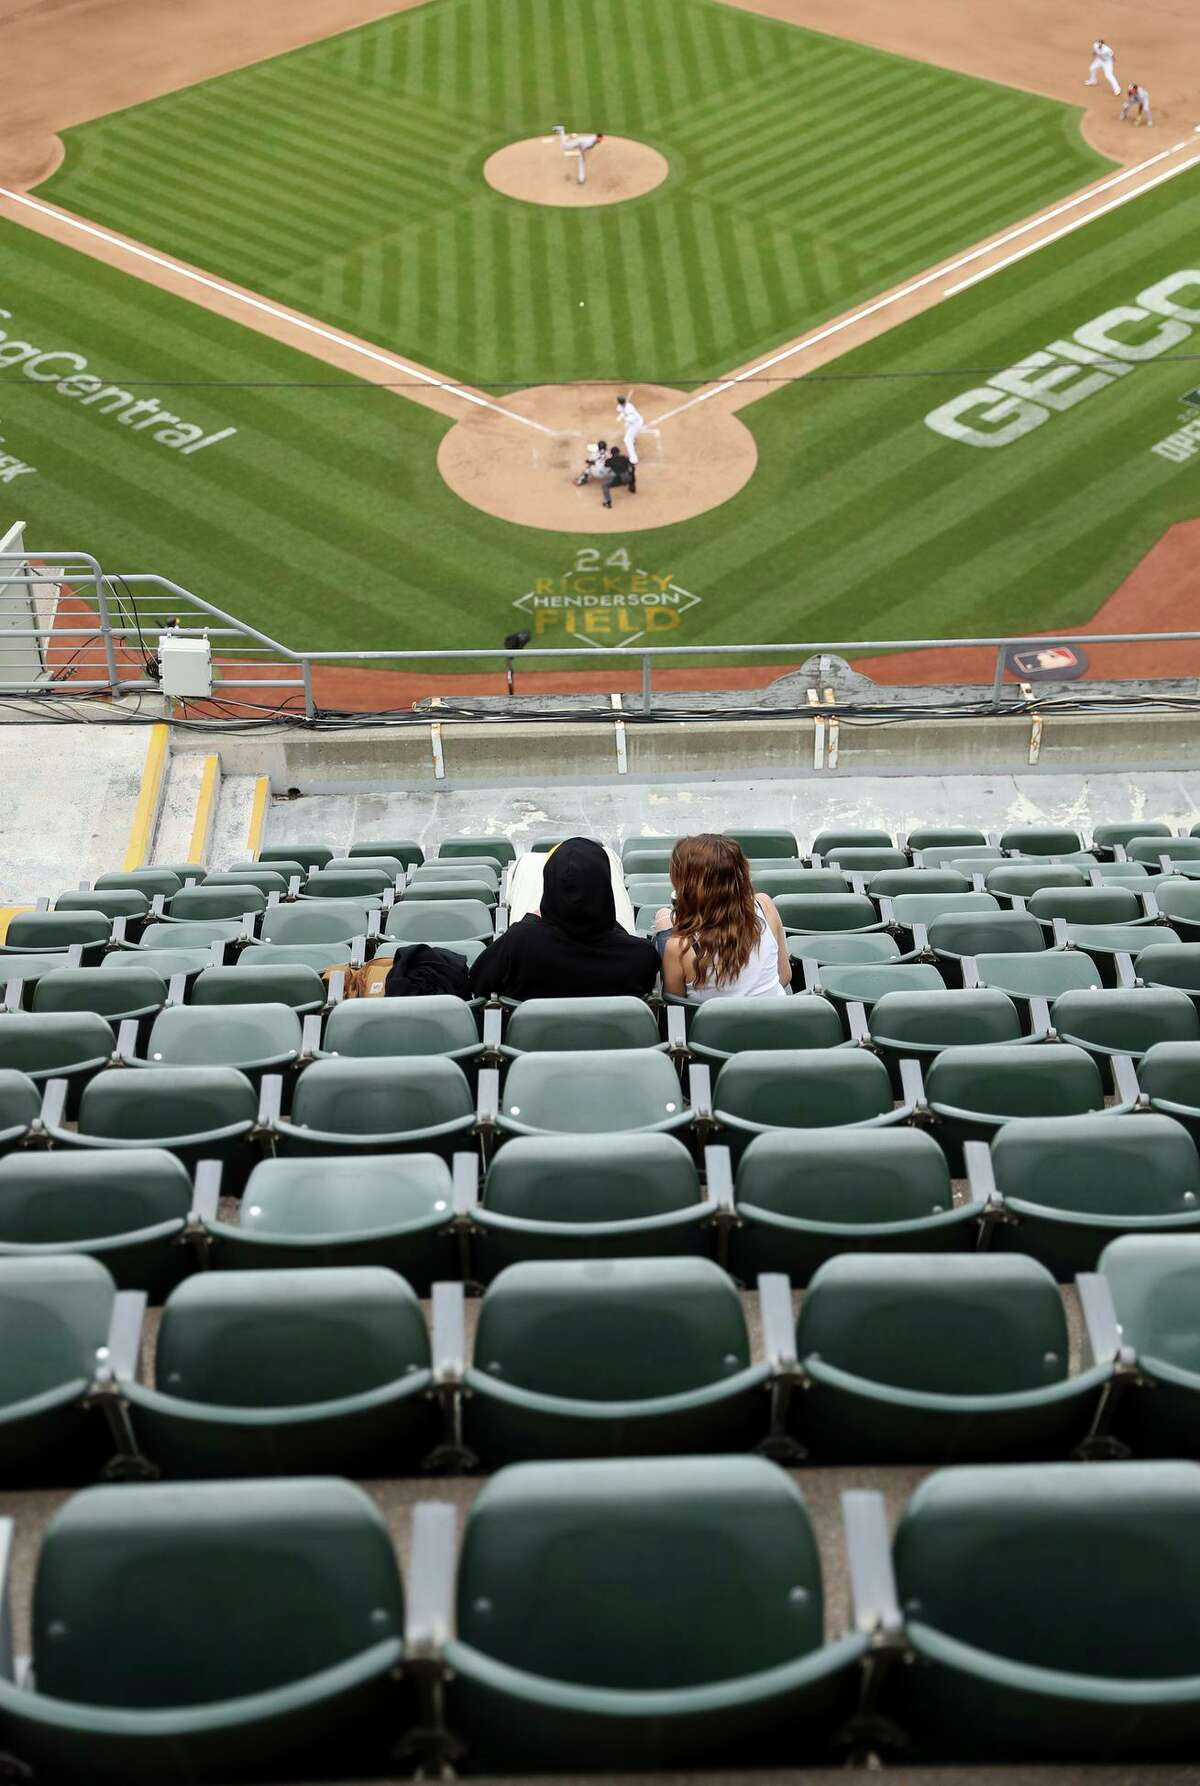 MLB fans shocked by low attendance numbers during game between